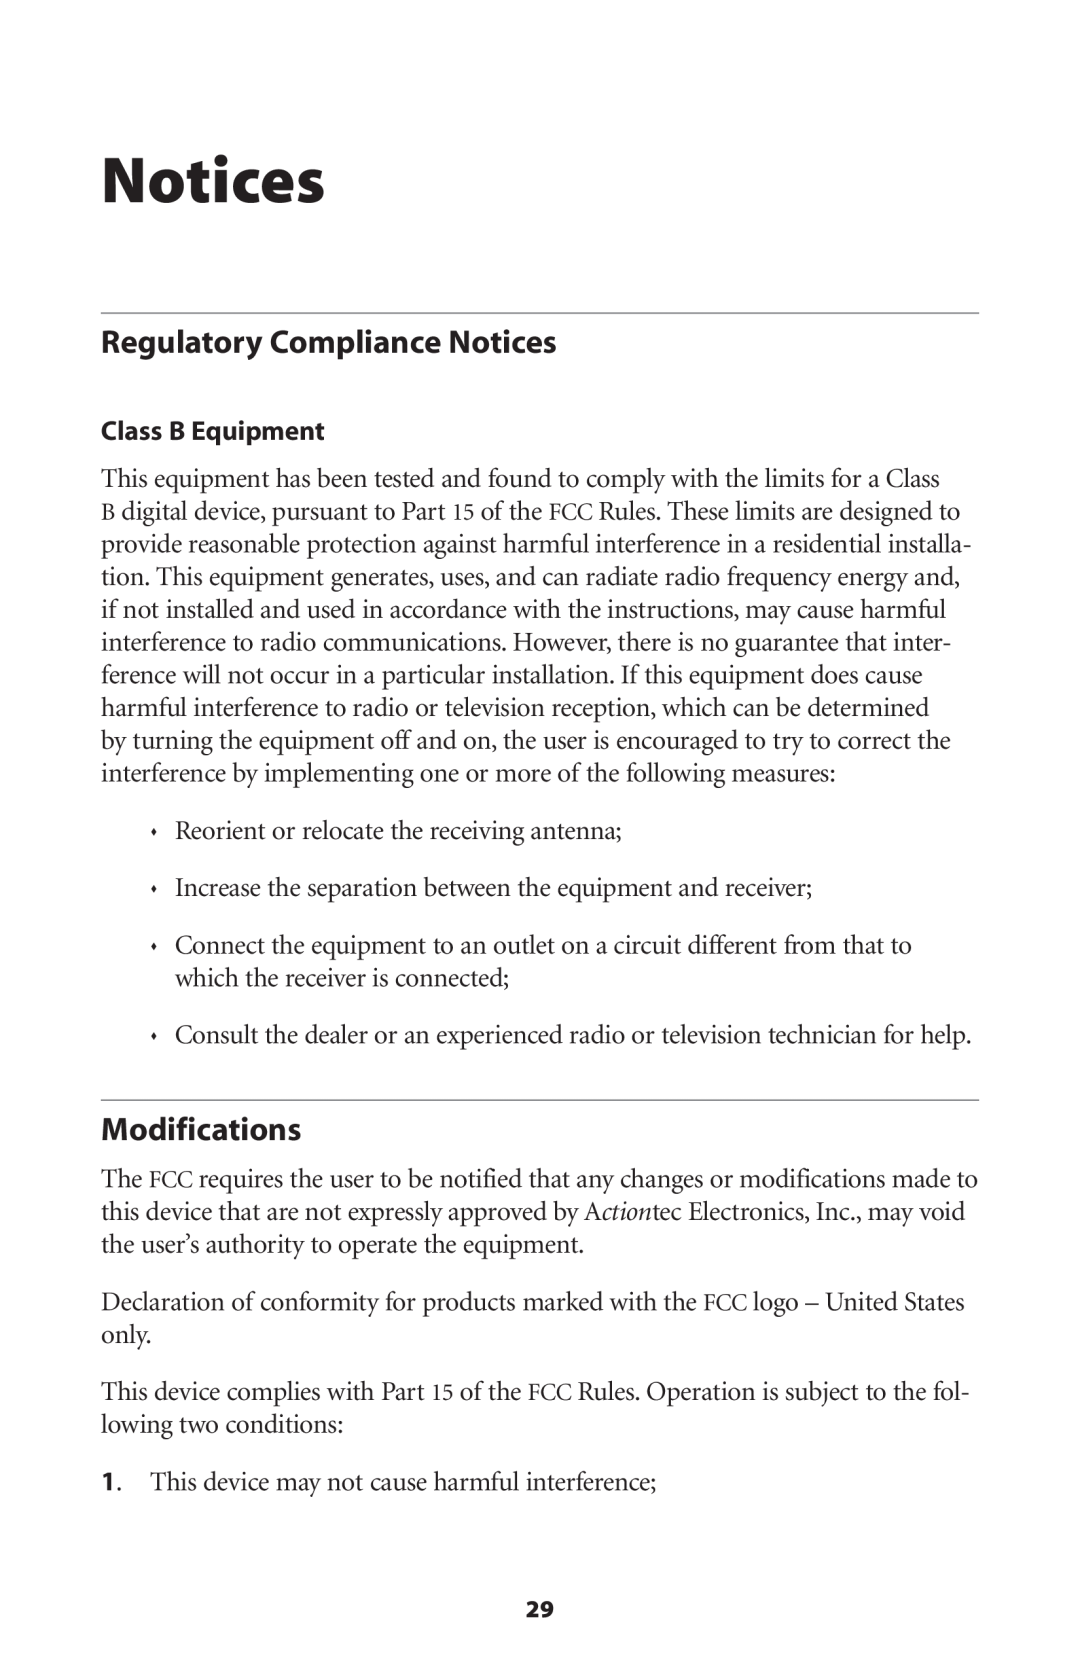 Actiontec electronic 802EAG user manual Regulatory Compliance Notices, Modifications 